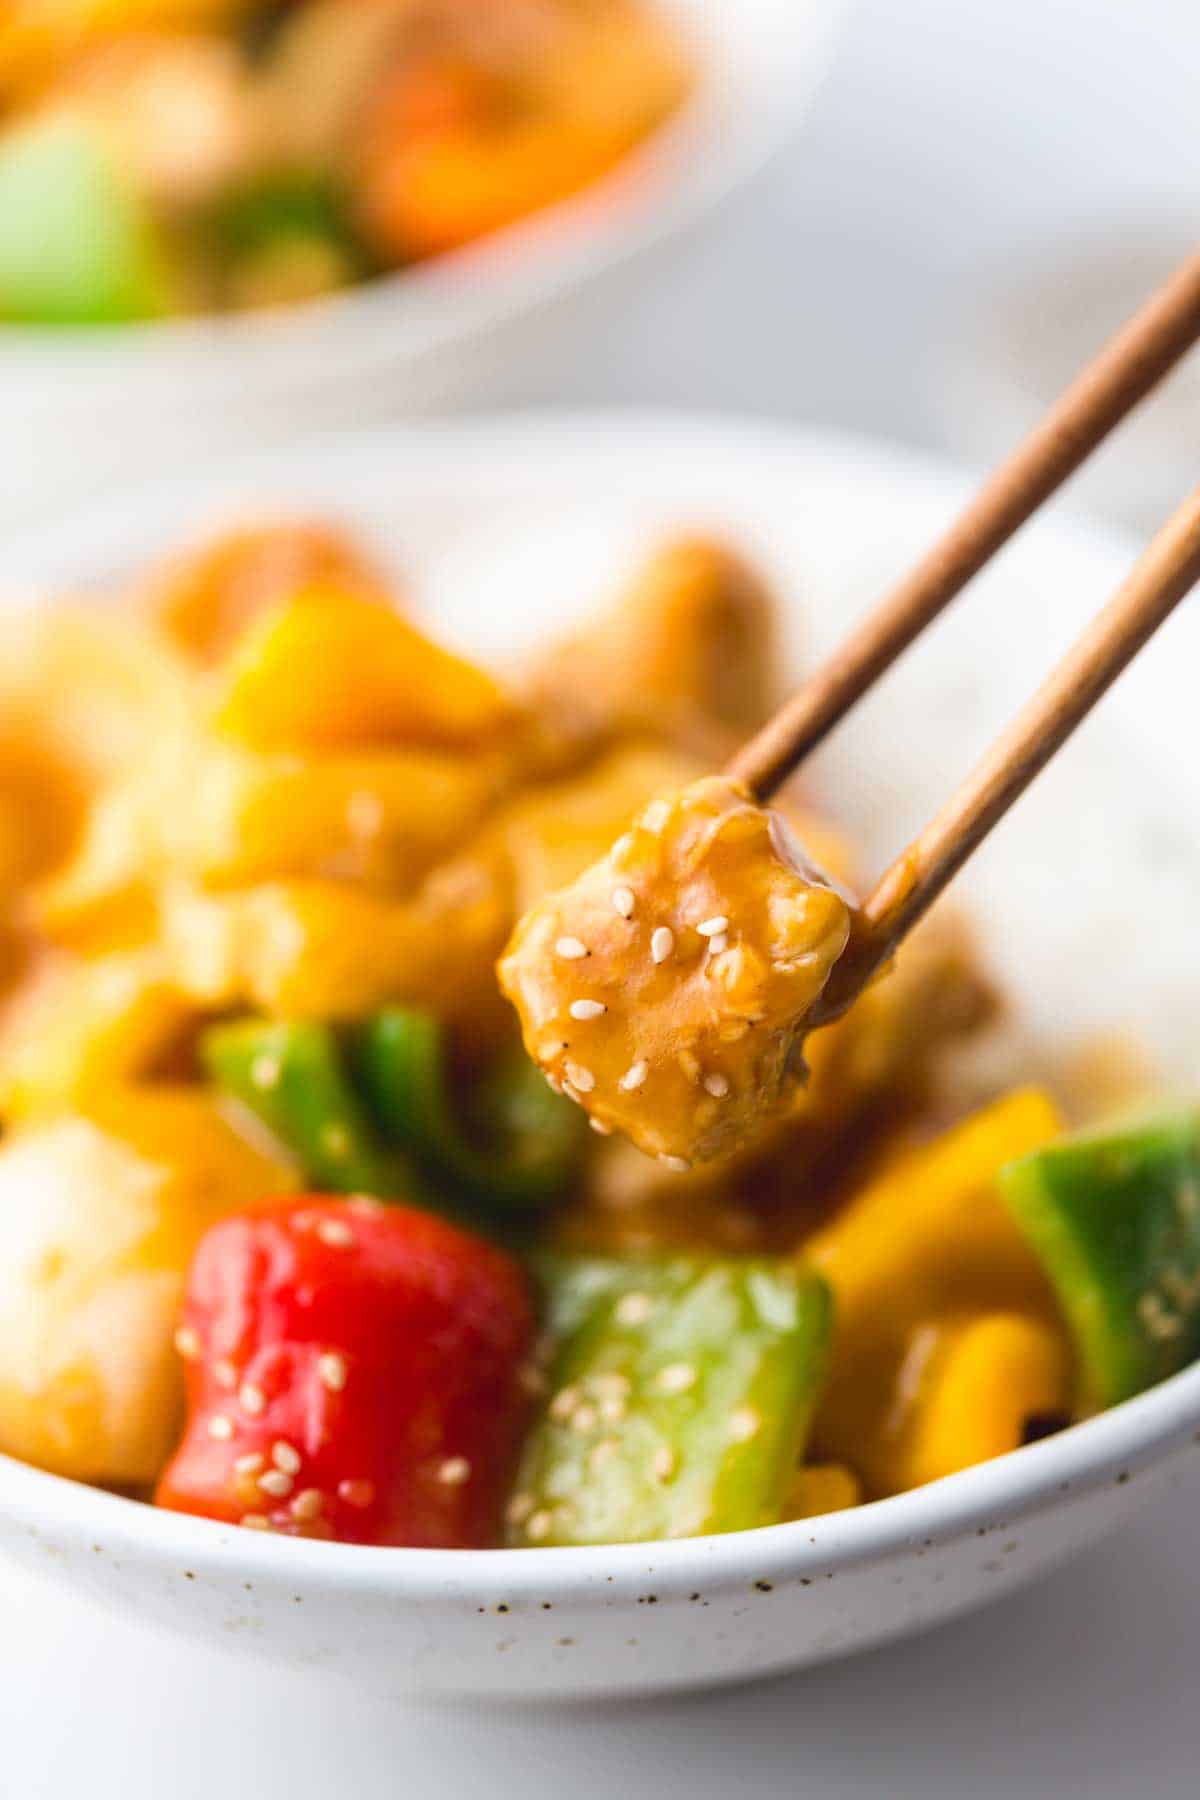 Sweet And Sour Chicken tossed with toasted sesame seeds